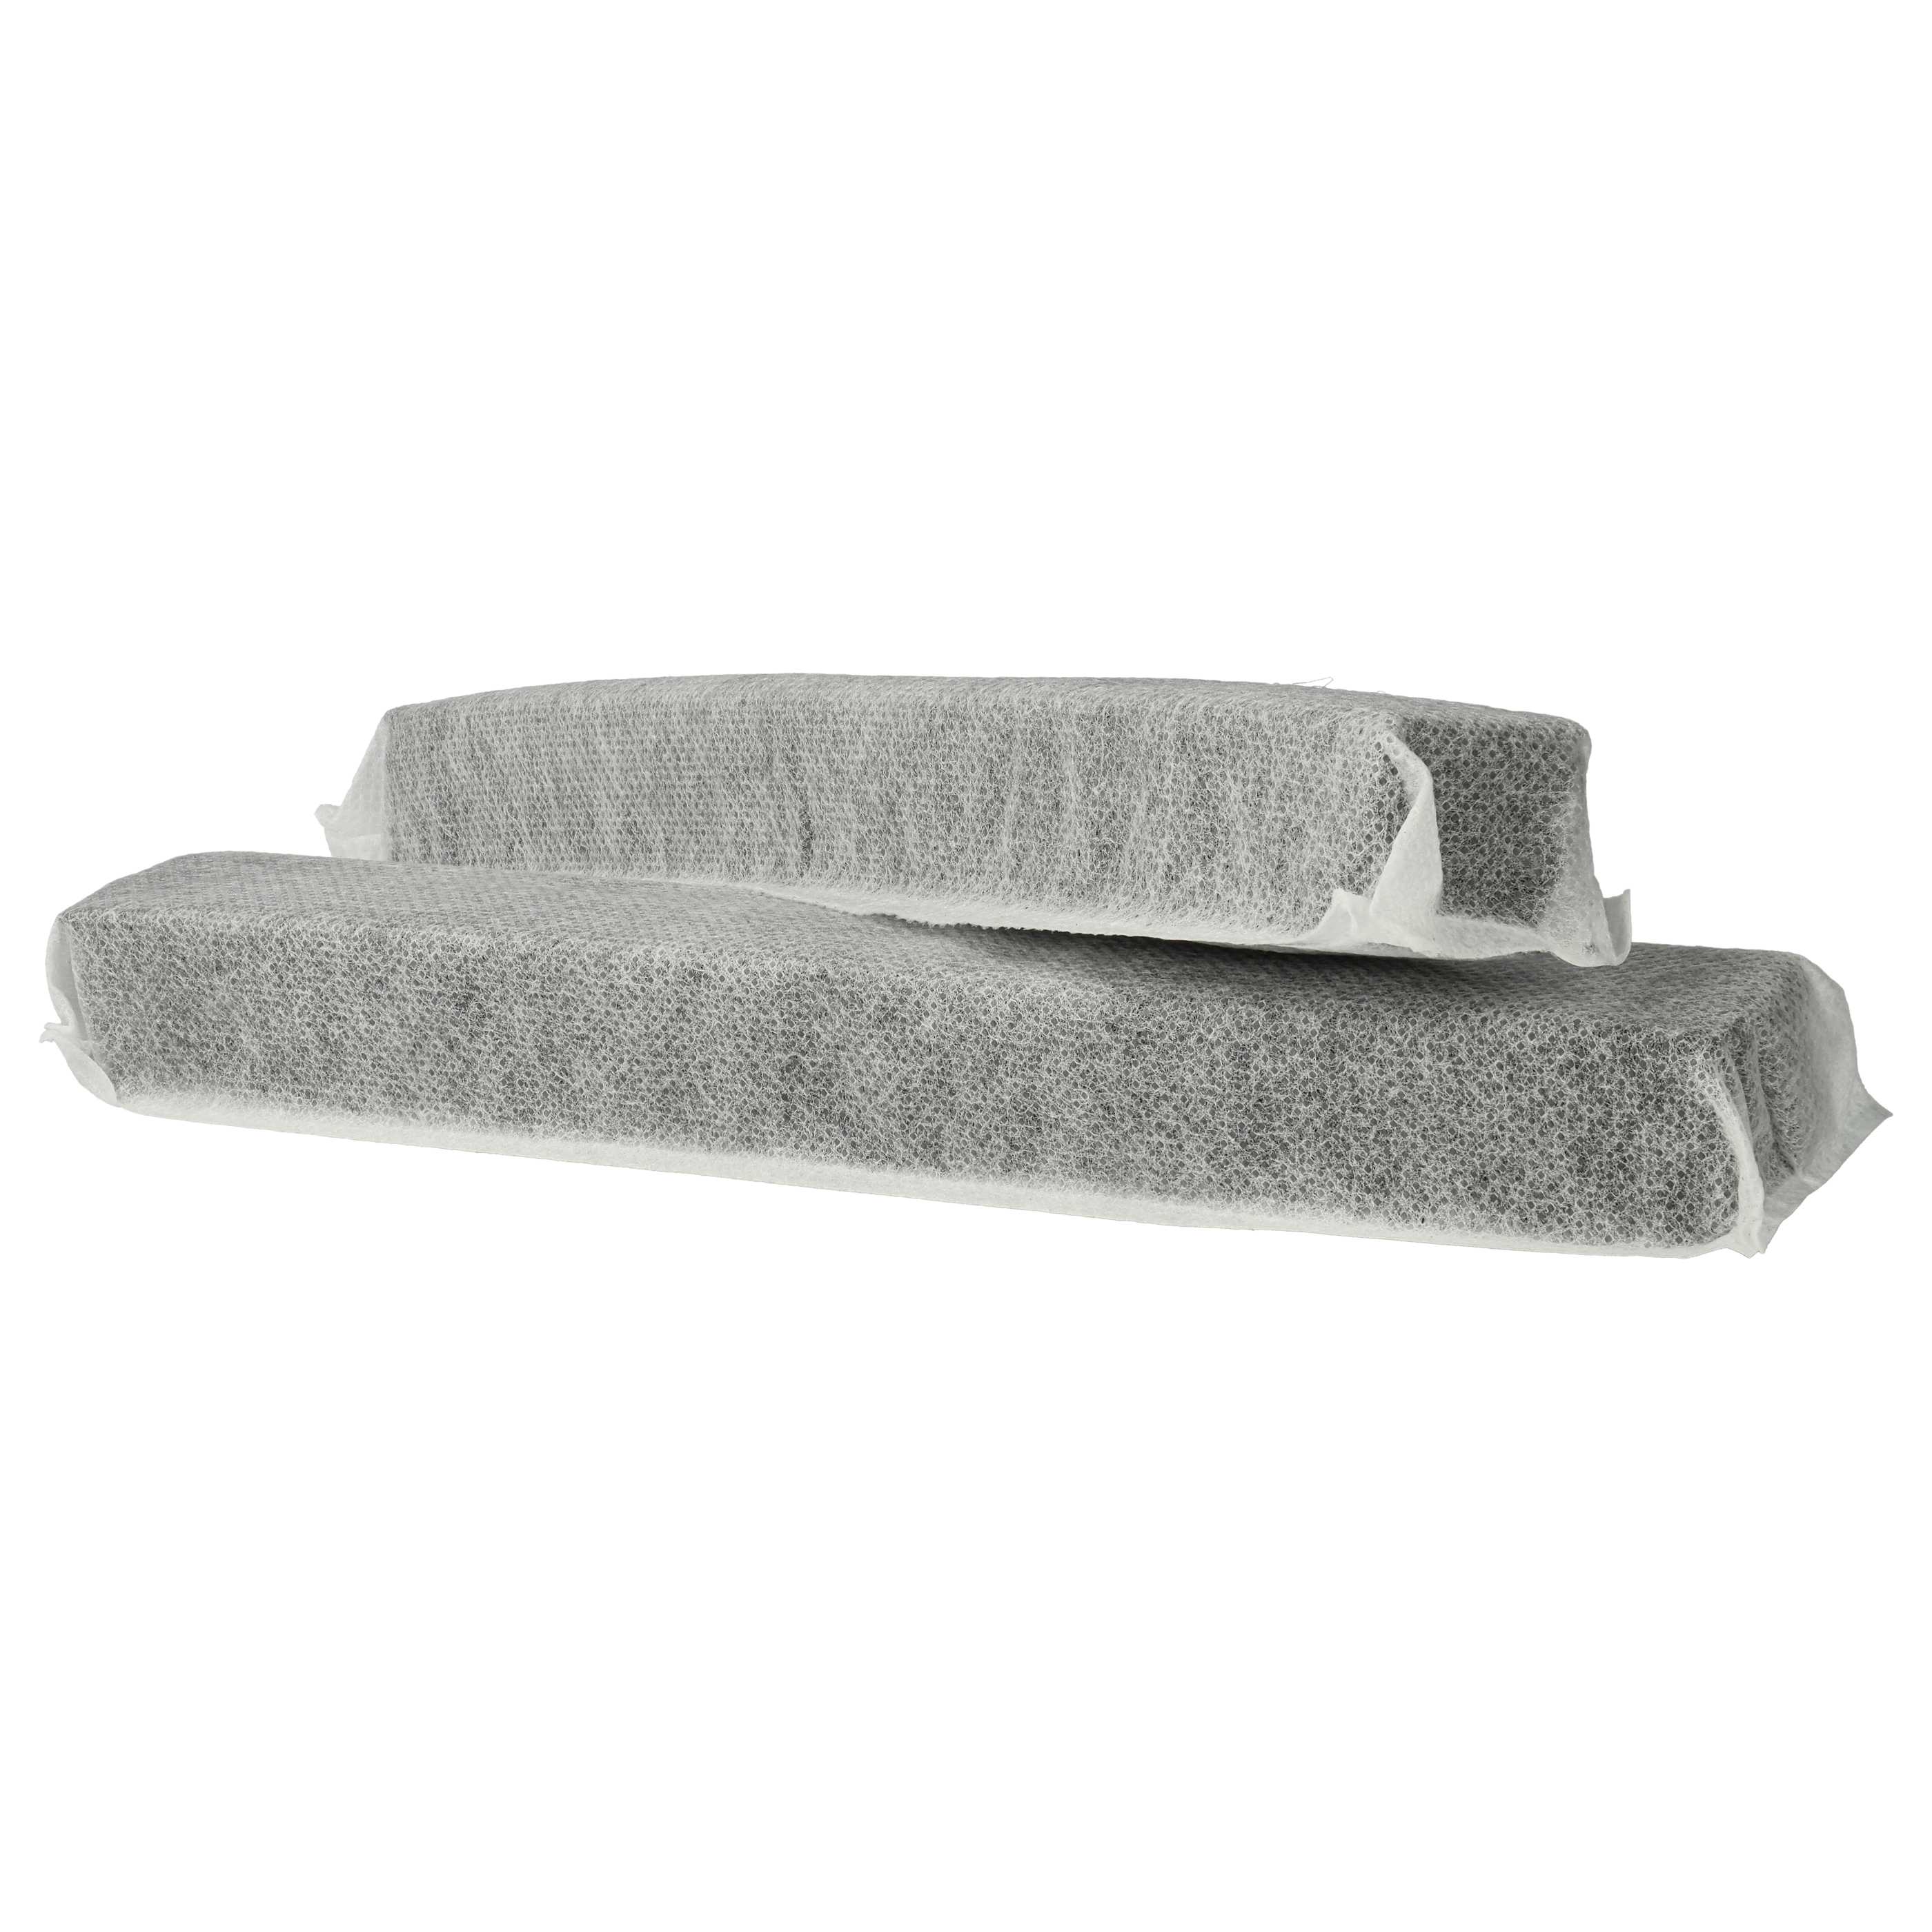 2x Activated Carbon Filter replaces Miele KKF-RF, 7236280 for Miele Refrigerator